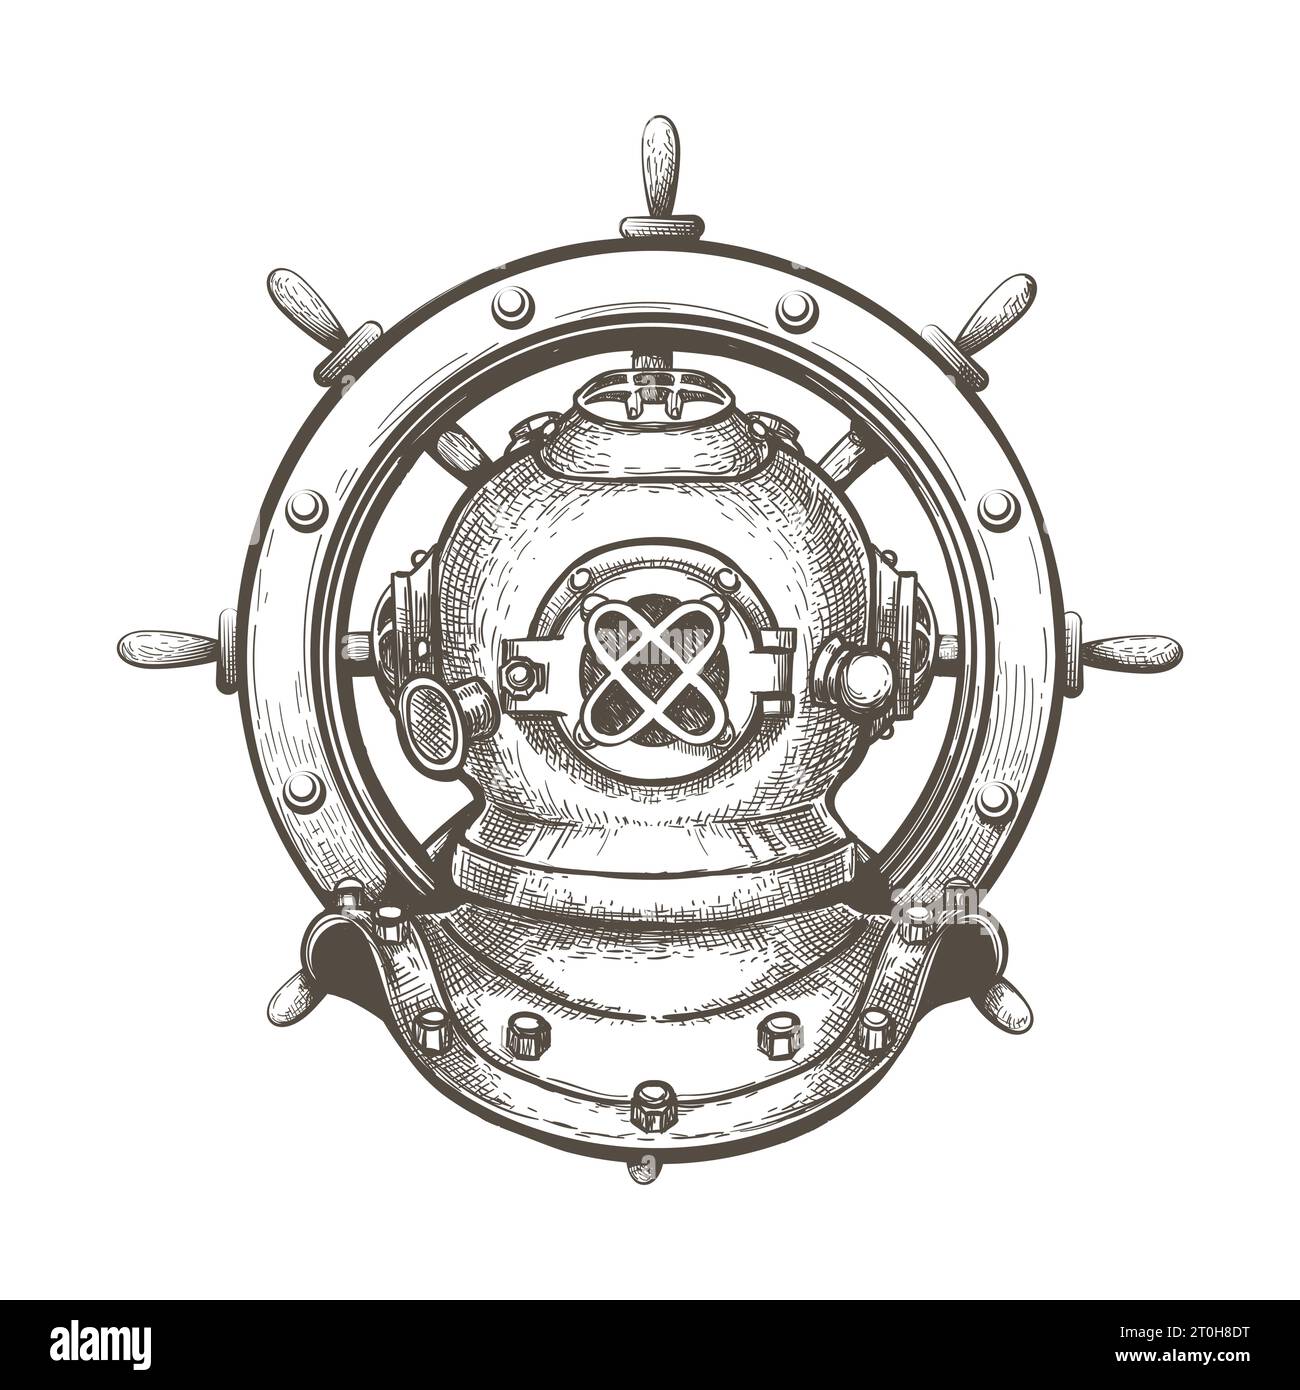 Engraving Tattoo of Diving Helmet with Ship Steering Wheel isolated on white background. Vector illustration. Stock Vector